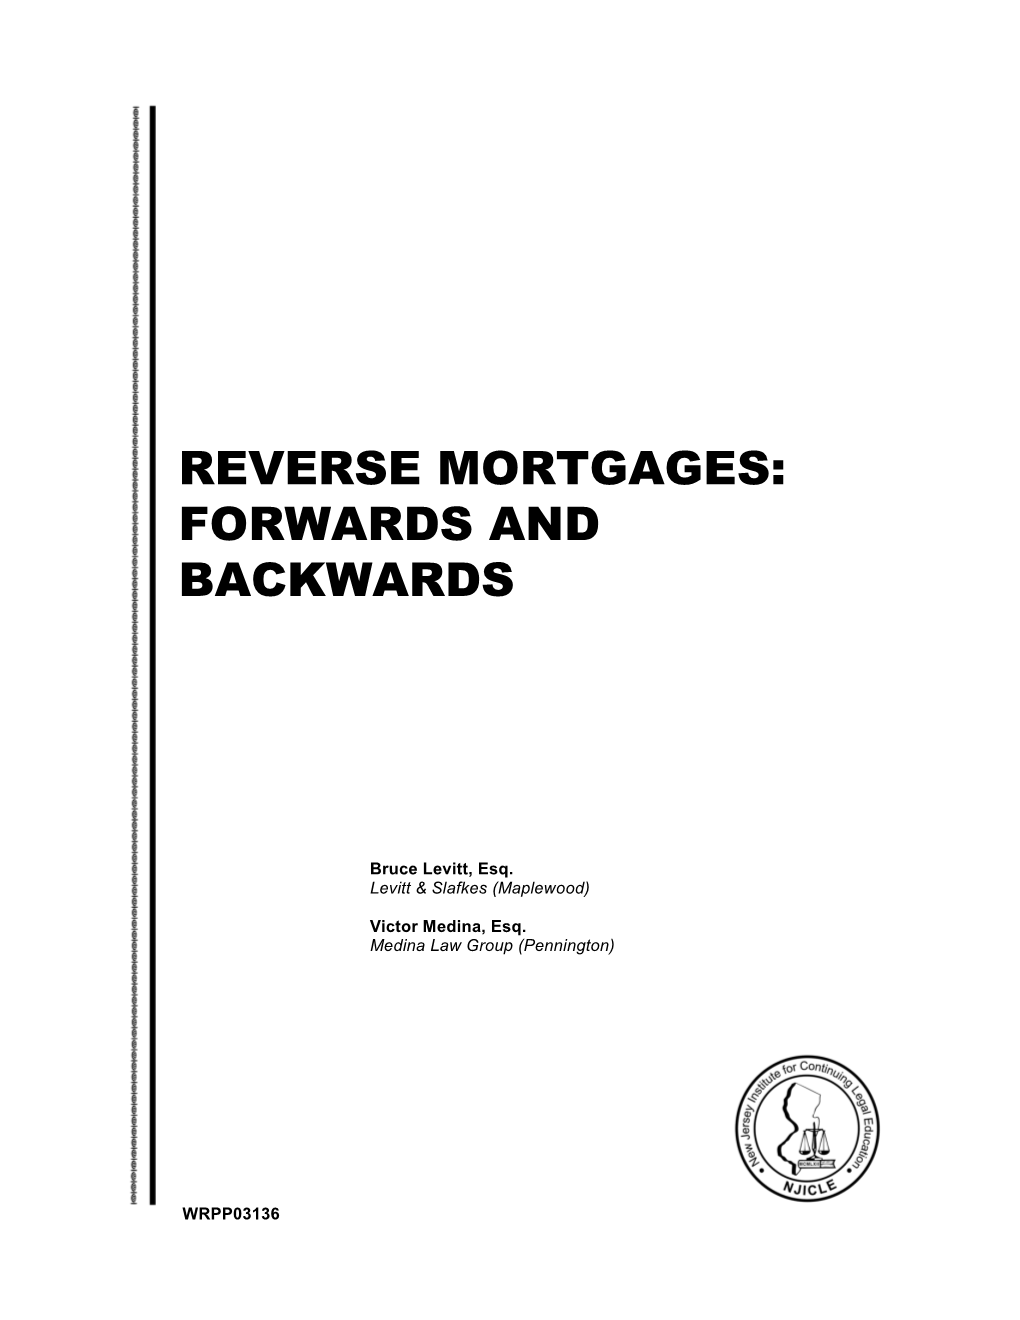 Reverse Mortgages: Forwards and Backwards